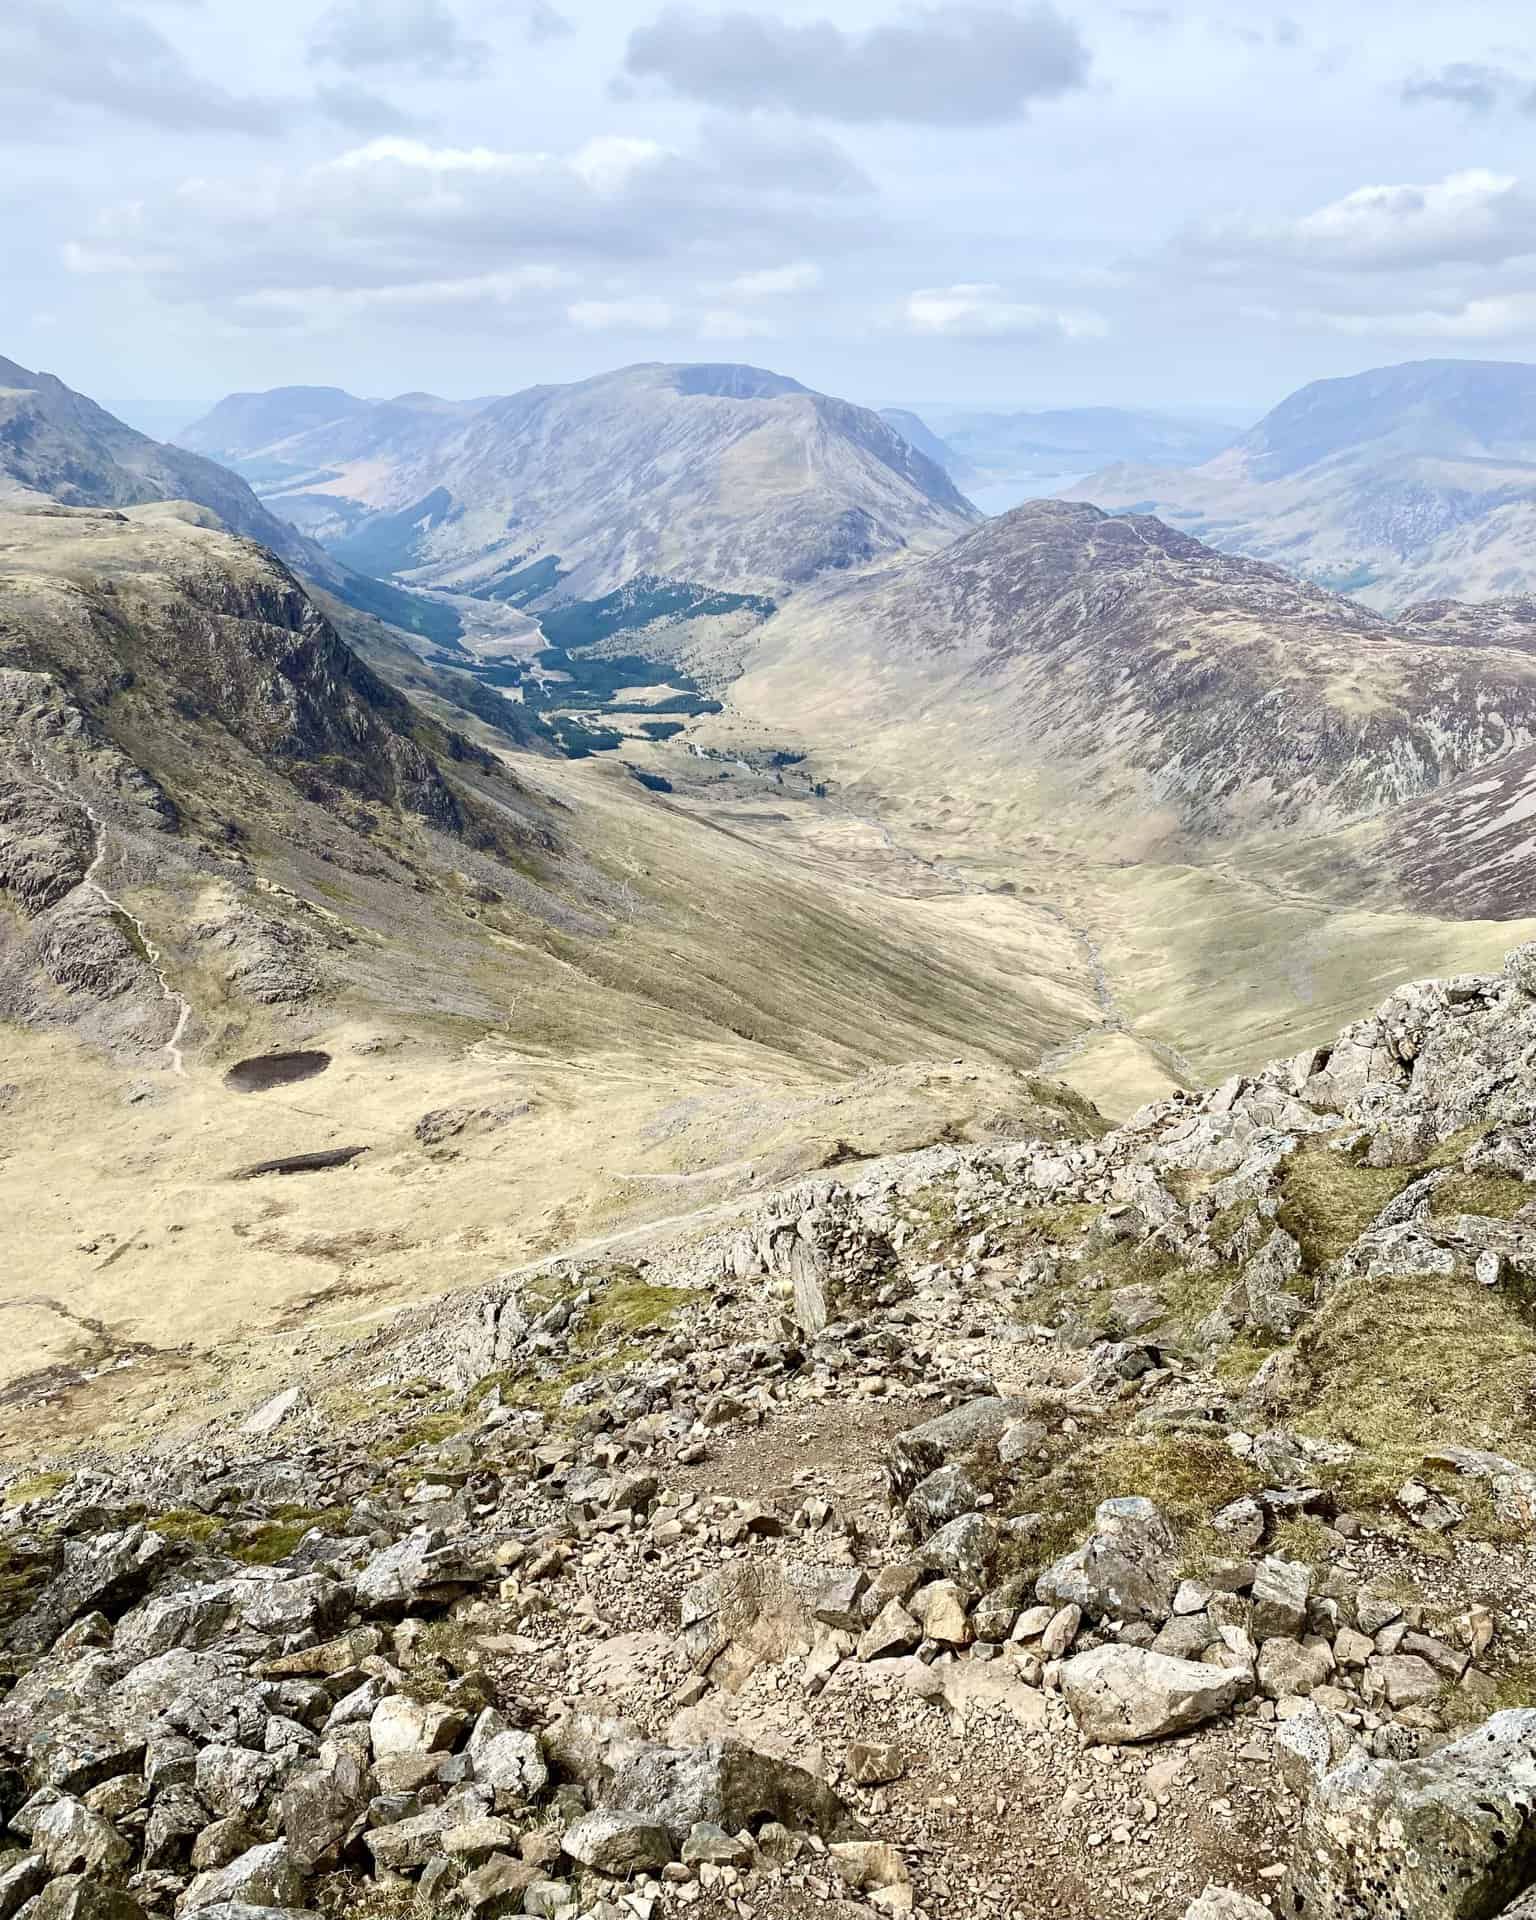 Amazing views during the north-west descent of Great Gable, but care is needed as the steep mountainside is covered with loose, slippery scree. This is roughly the halfway point of the Great Gable walk.